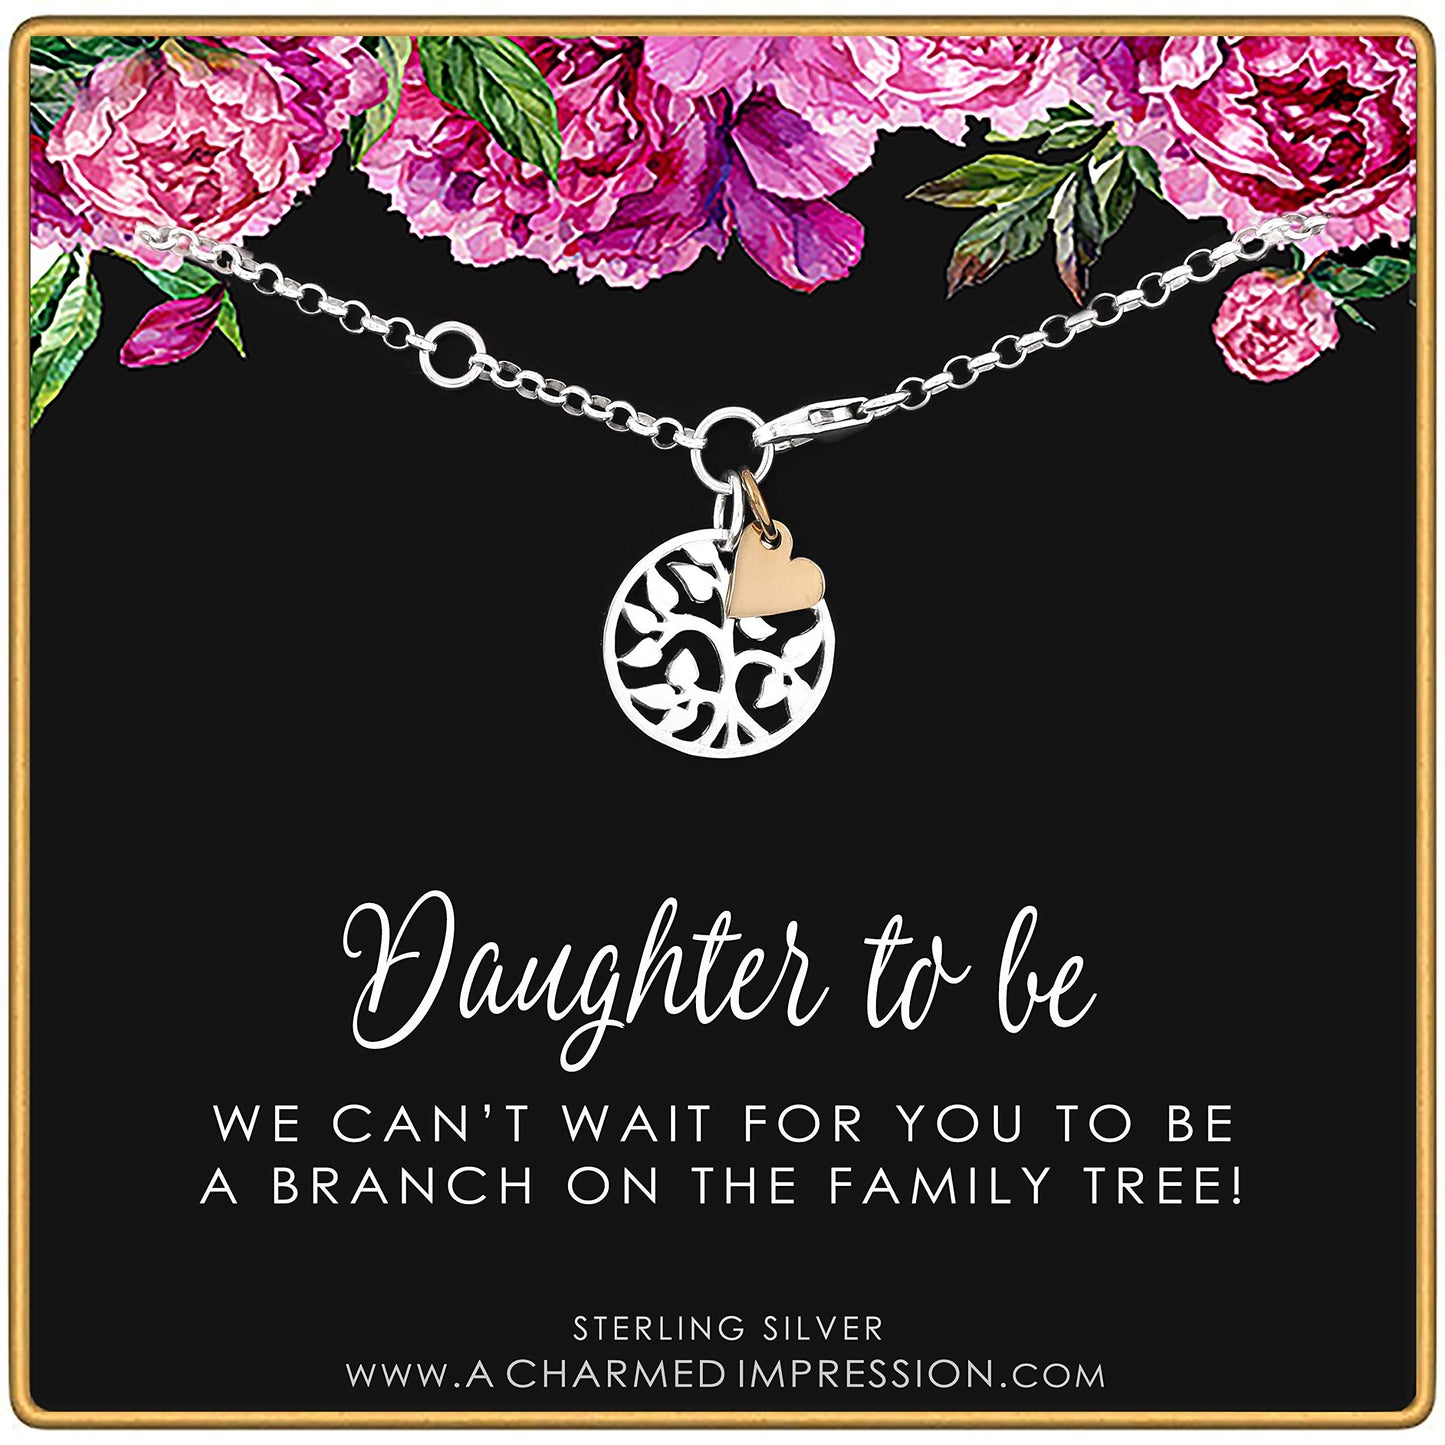 A Charmed Impression Daughter to be Gift • Welcome to Our Family Tree • Sterling Silver Bracelet • Gifts for Stepdaughter or Daughter in Law • Silver Tree Gold Heart Charm • Jewelry for Women